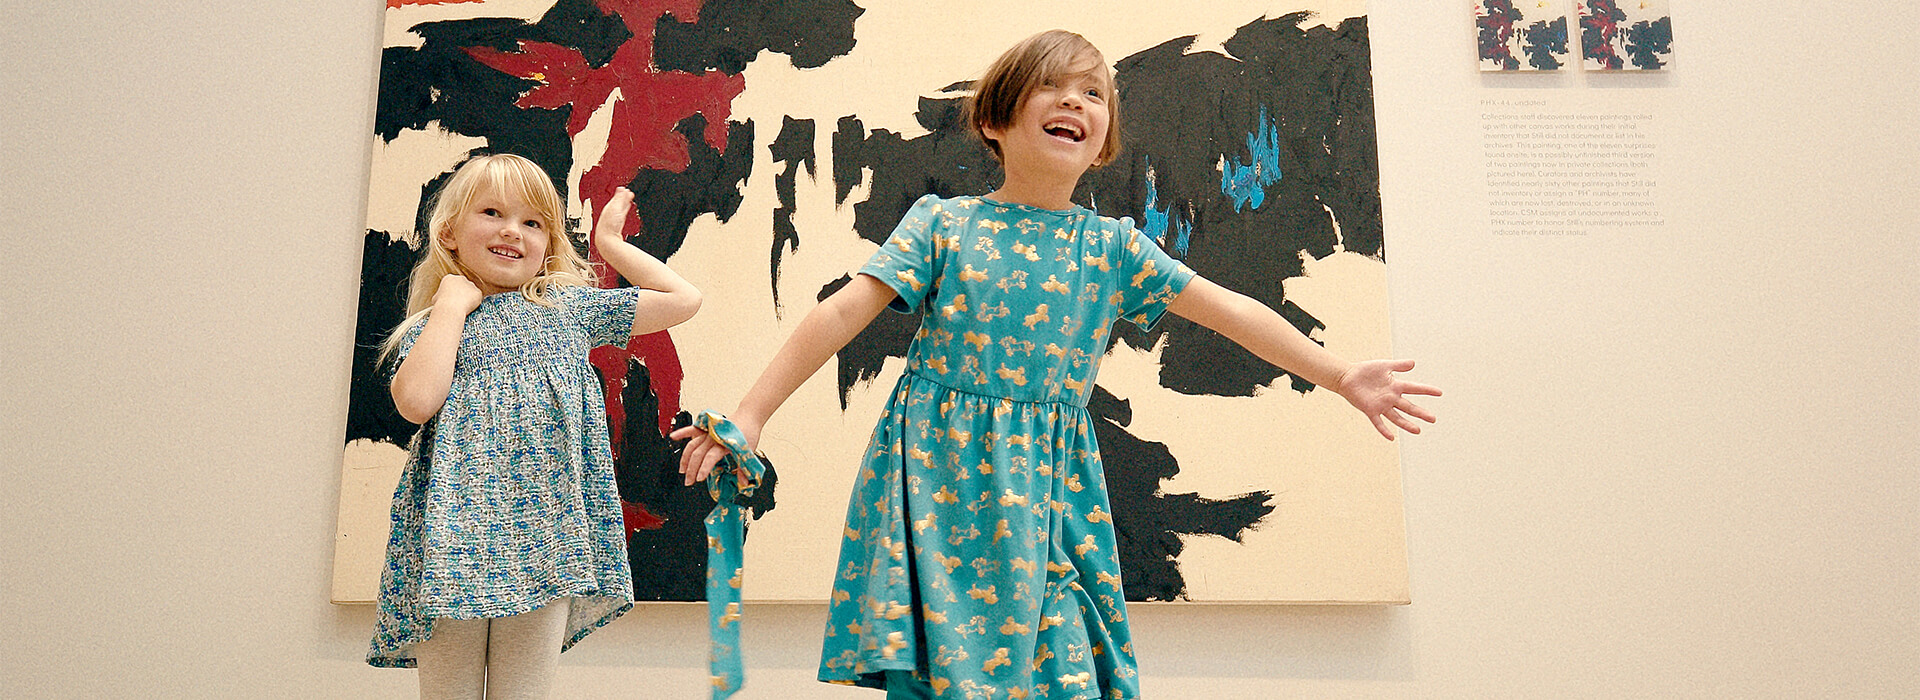 Two girls make silly poses in front of an abstract black, white, red, and blue painting